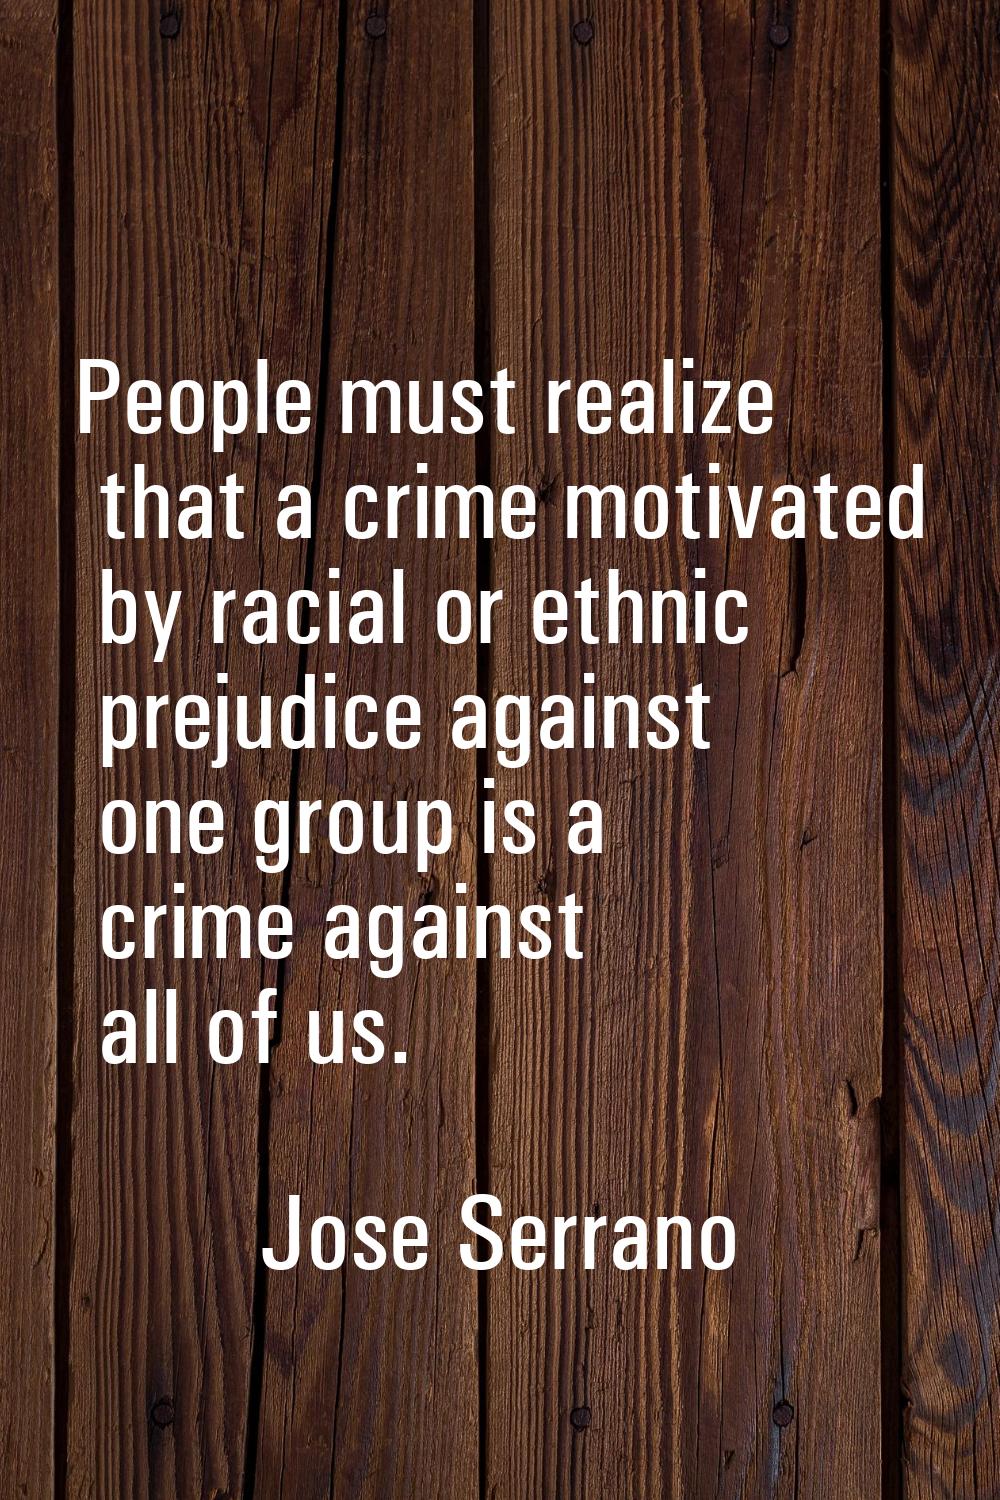 People must realize that a crime motivated by racial or ethnic prejudice against one group is a cri